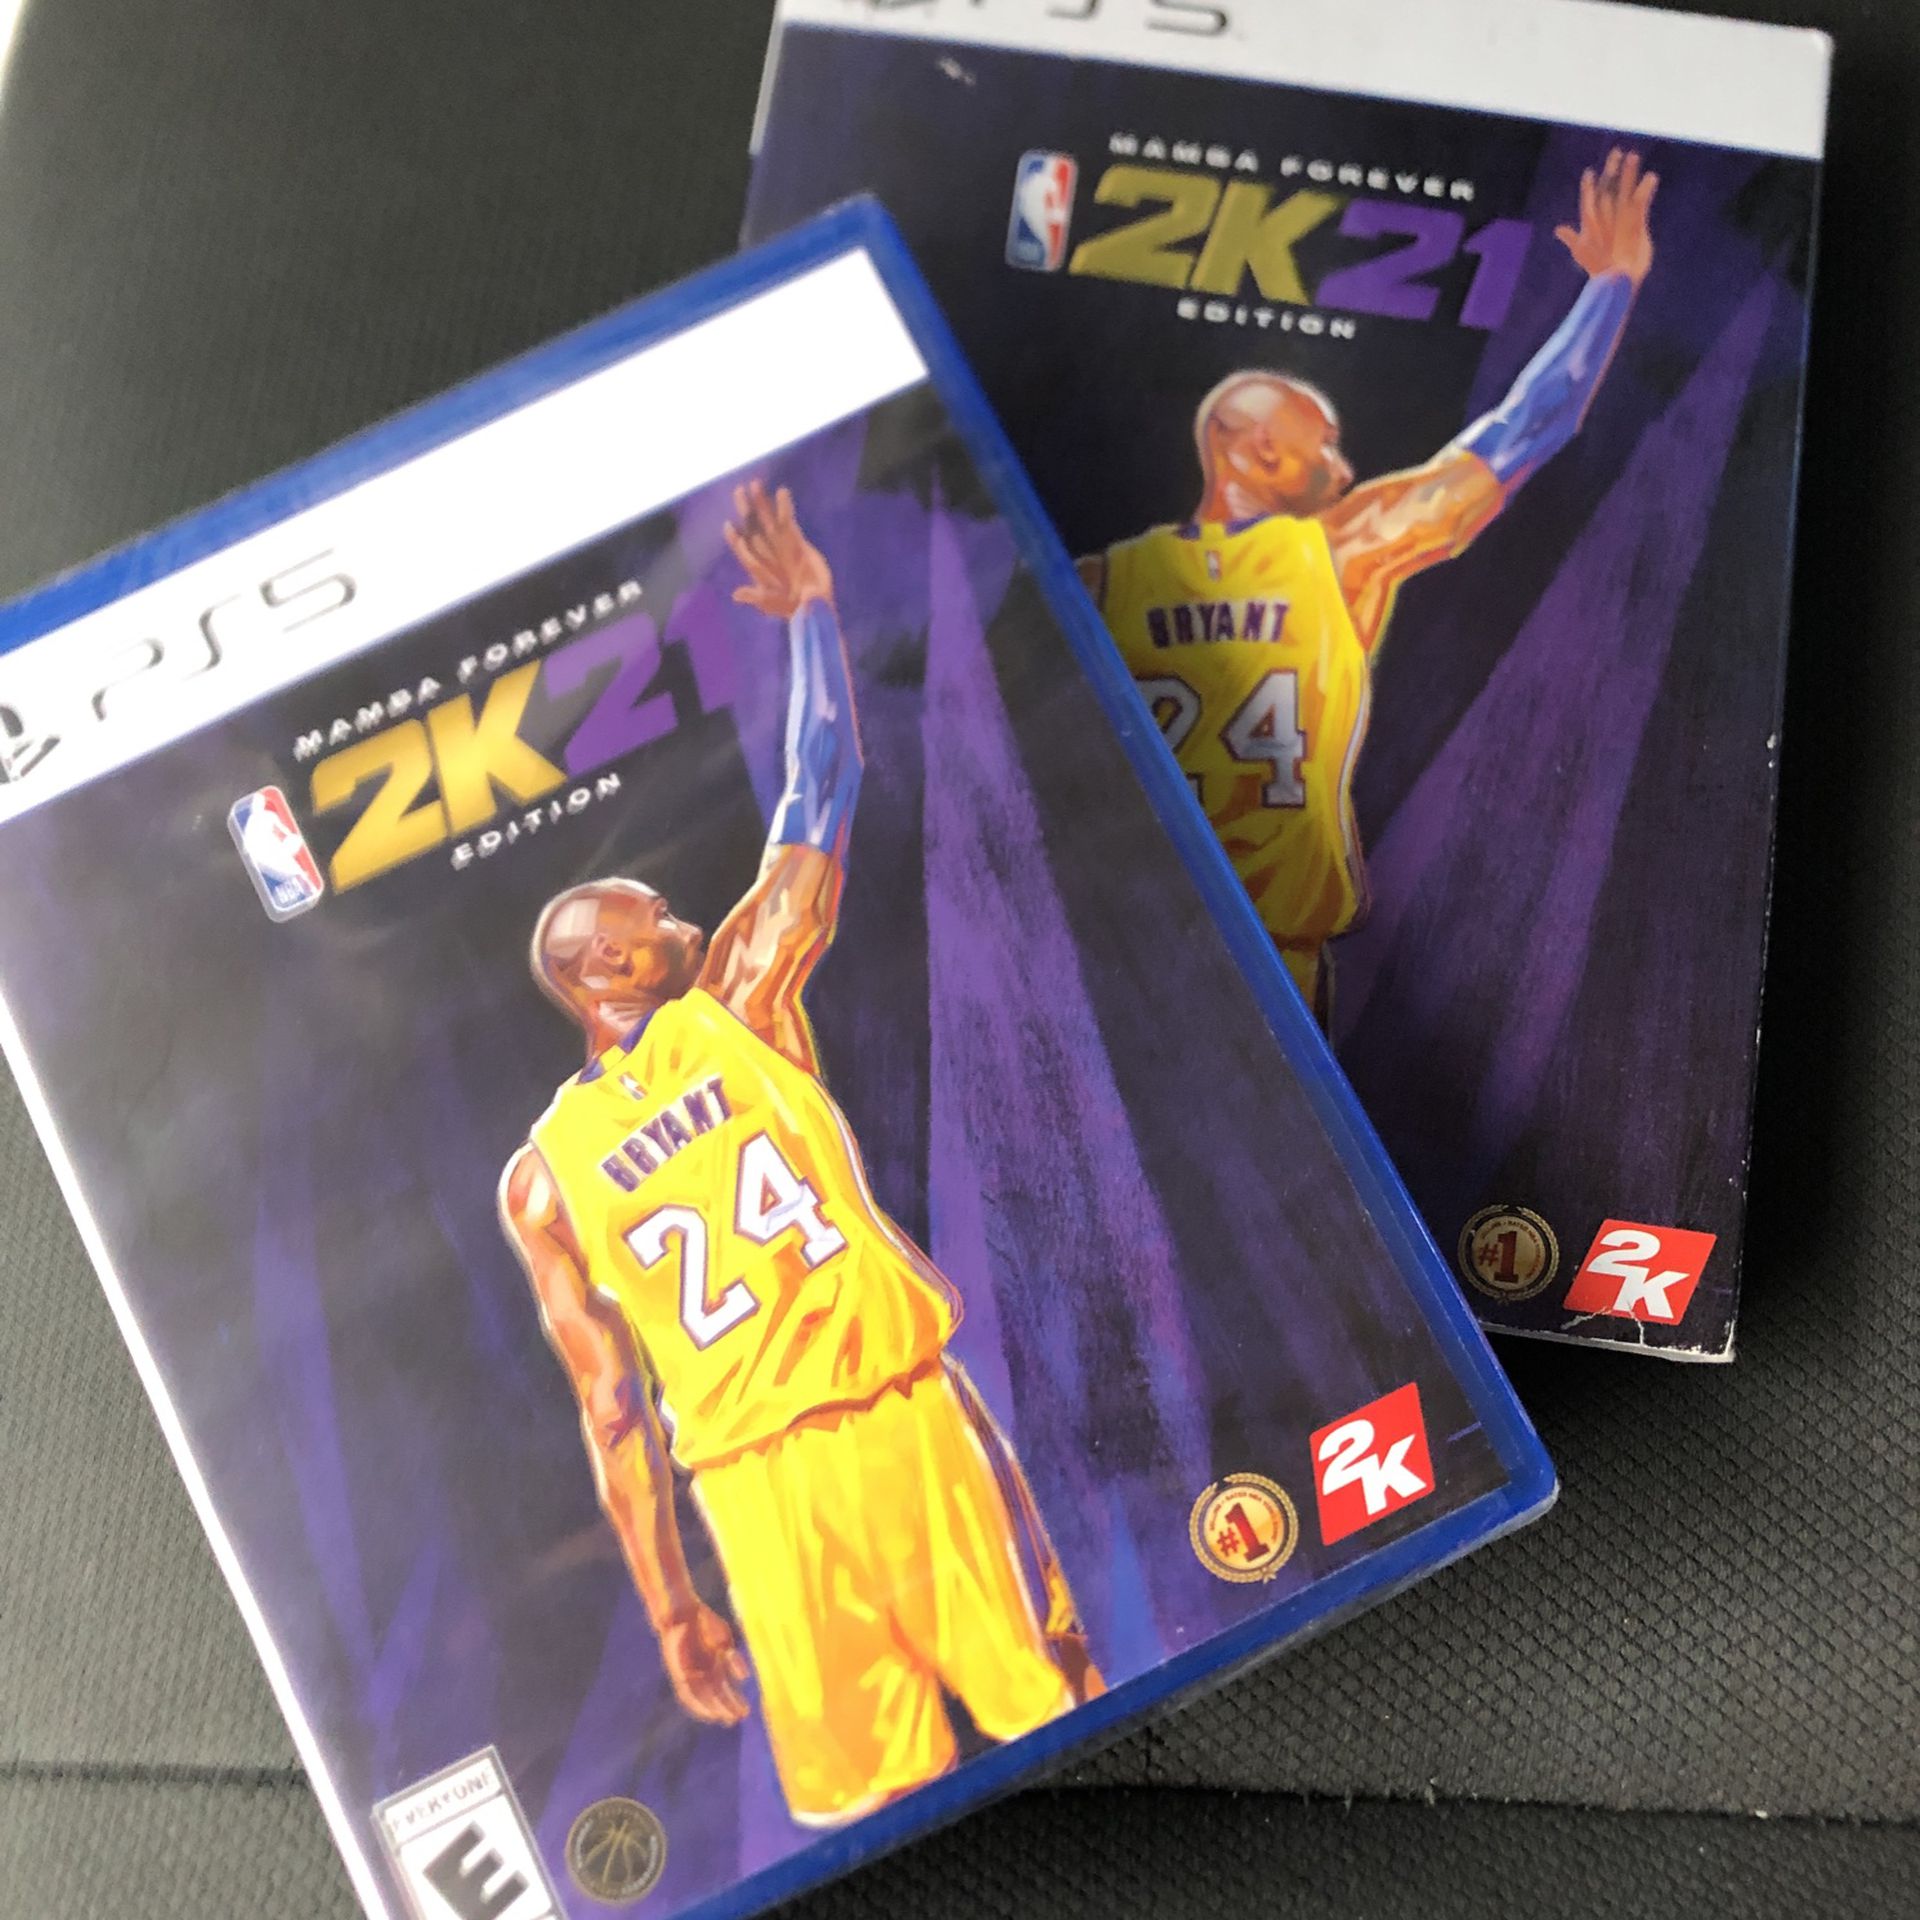 2k21 Mamba Forever Edition Ps5 for Sale in Mesa, AZ - OfferUp